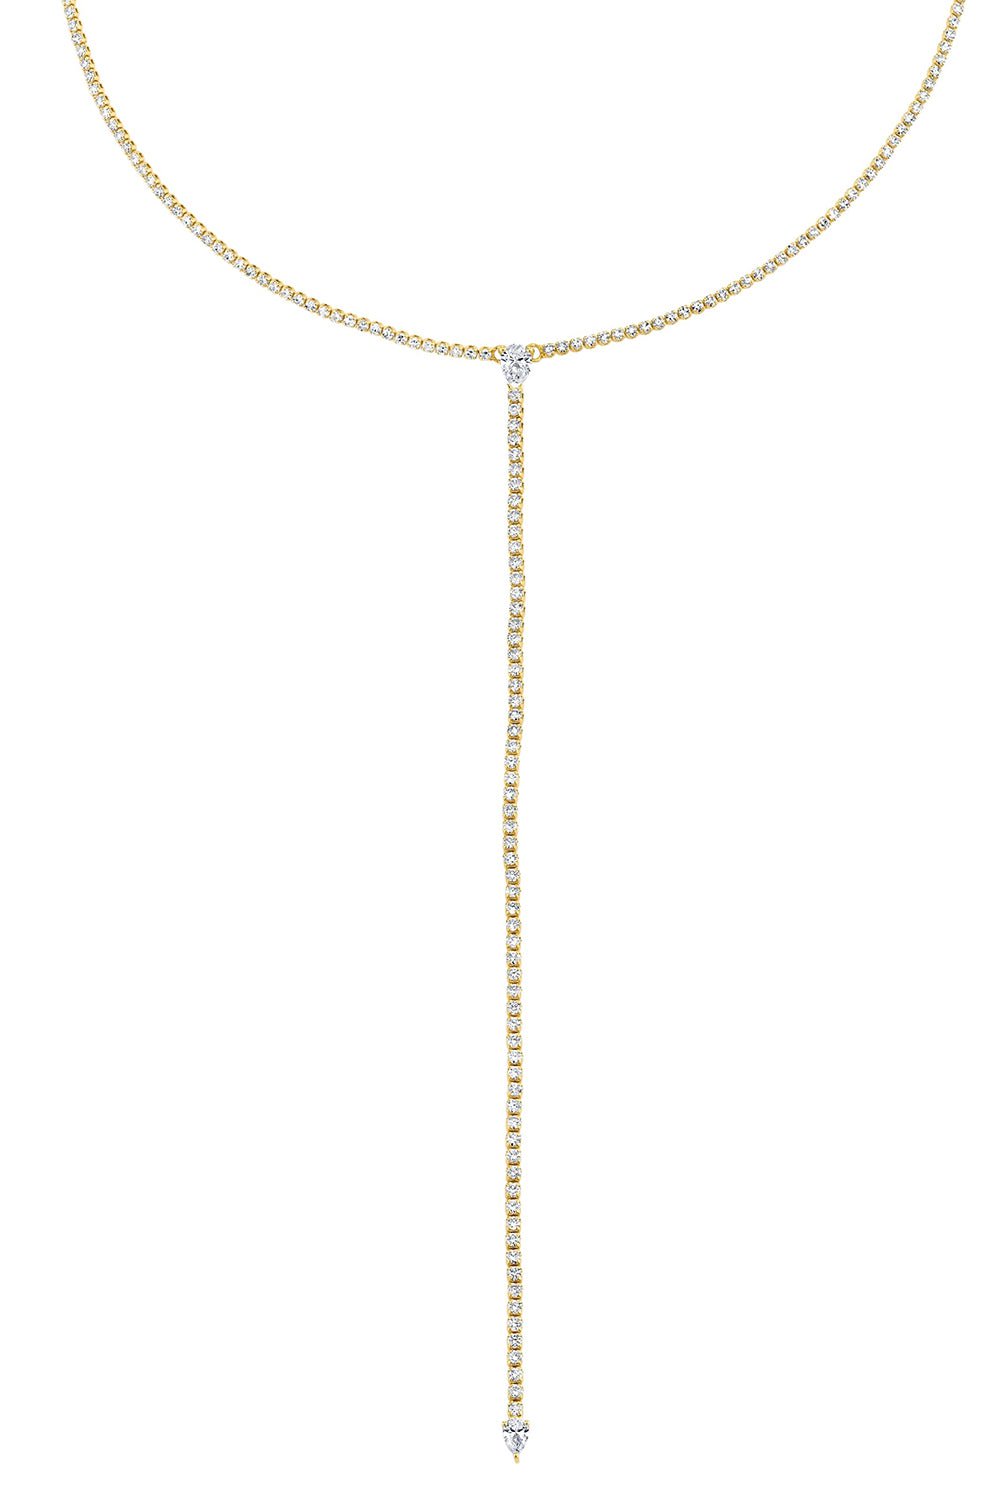 SHAY JEWELRY-Y Necklace-YELLOW GOLD